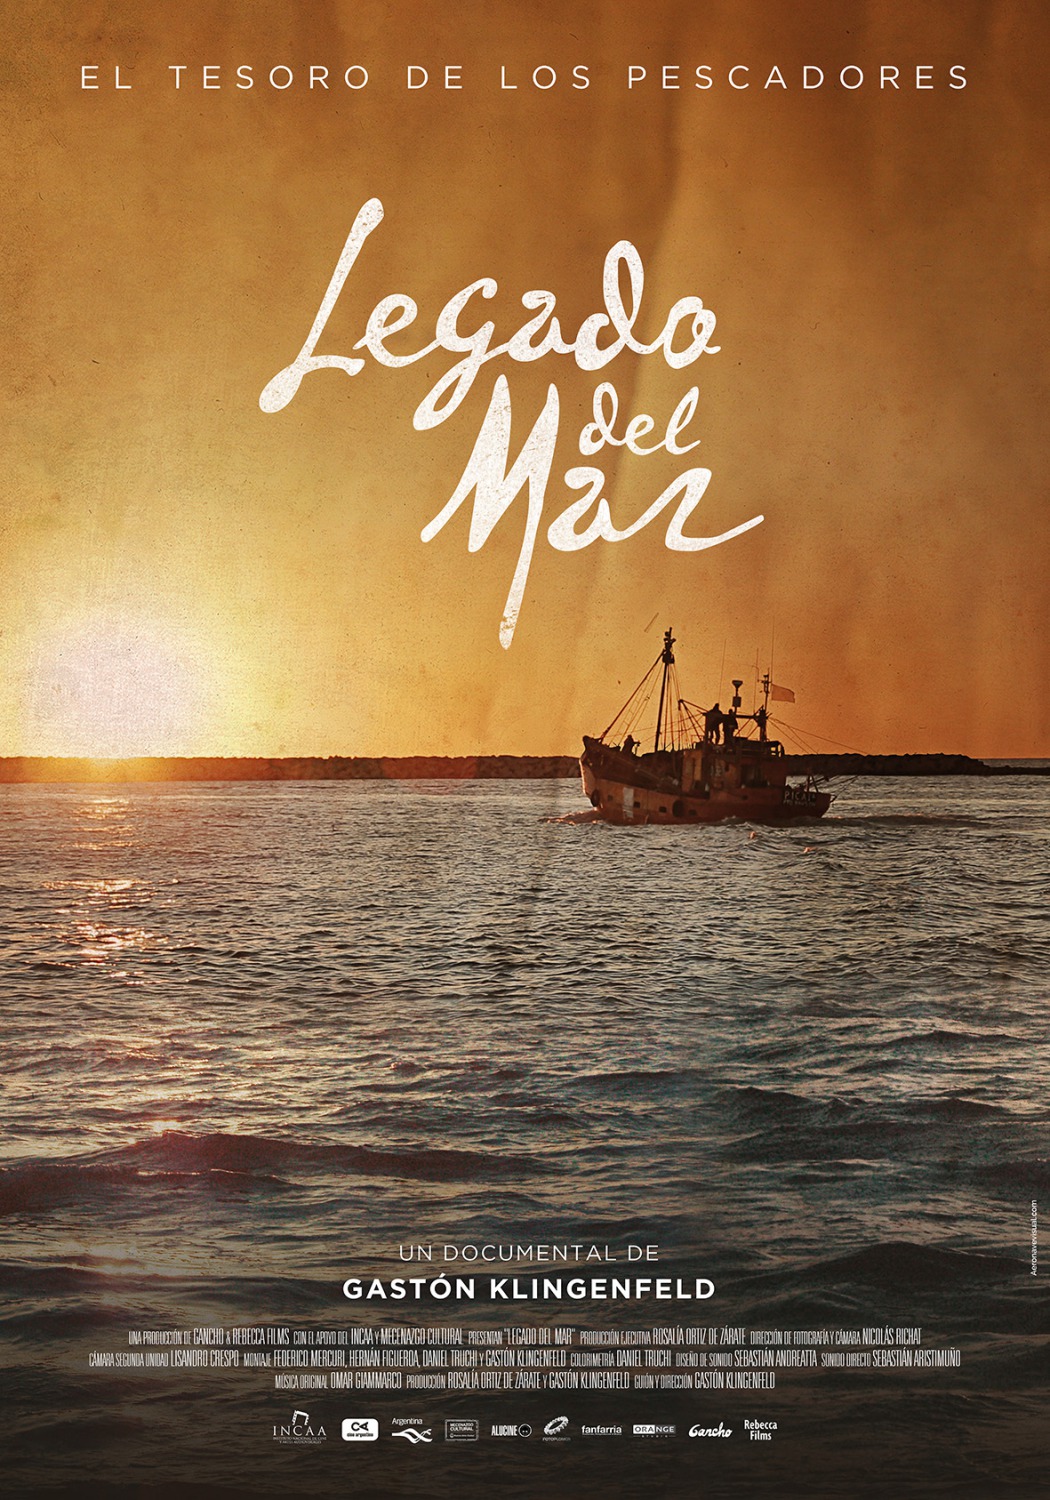 Extra Large Movie Poster Image for Legado del mar 